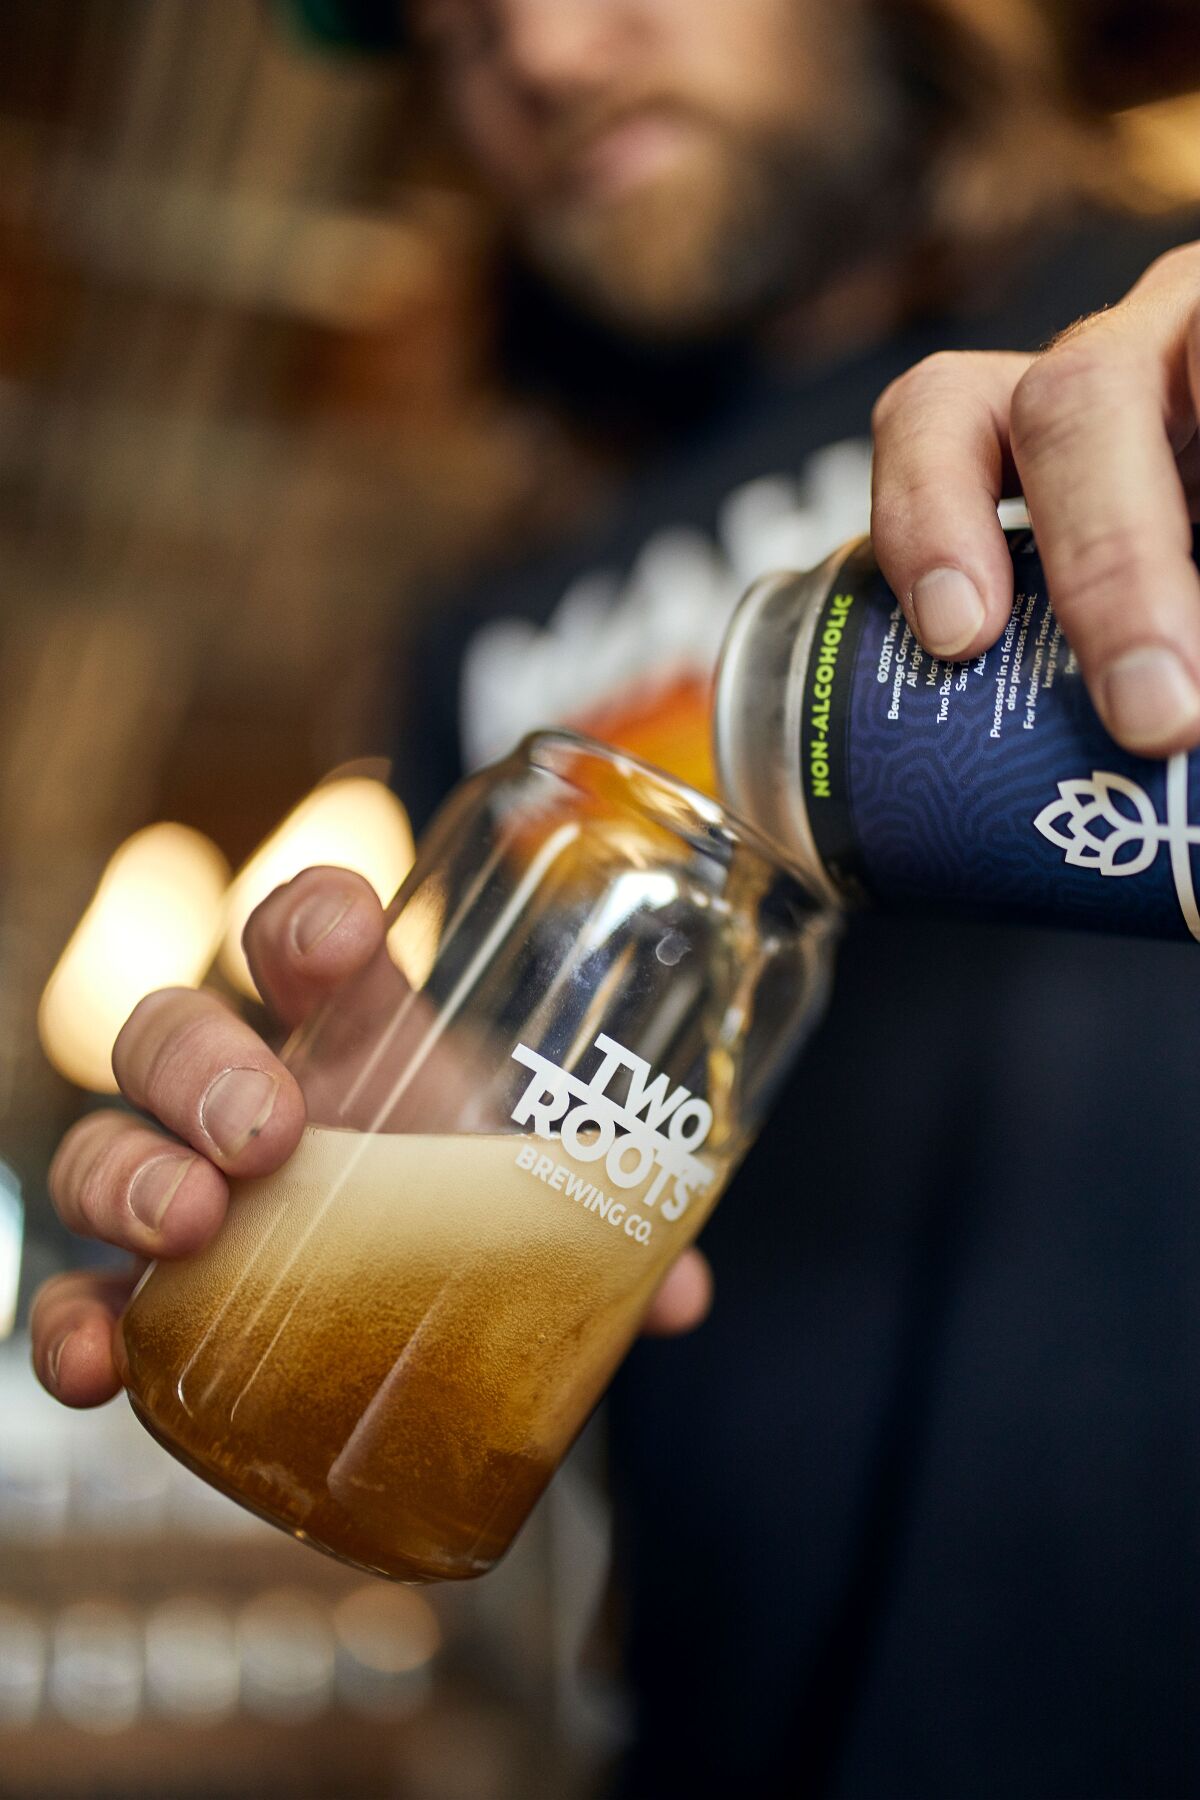 Two Roots is one of the San Diego brewers leading the charge in the non-alcoholic beer segment.